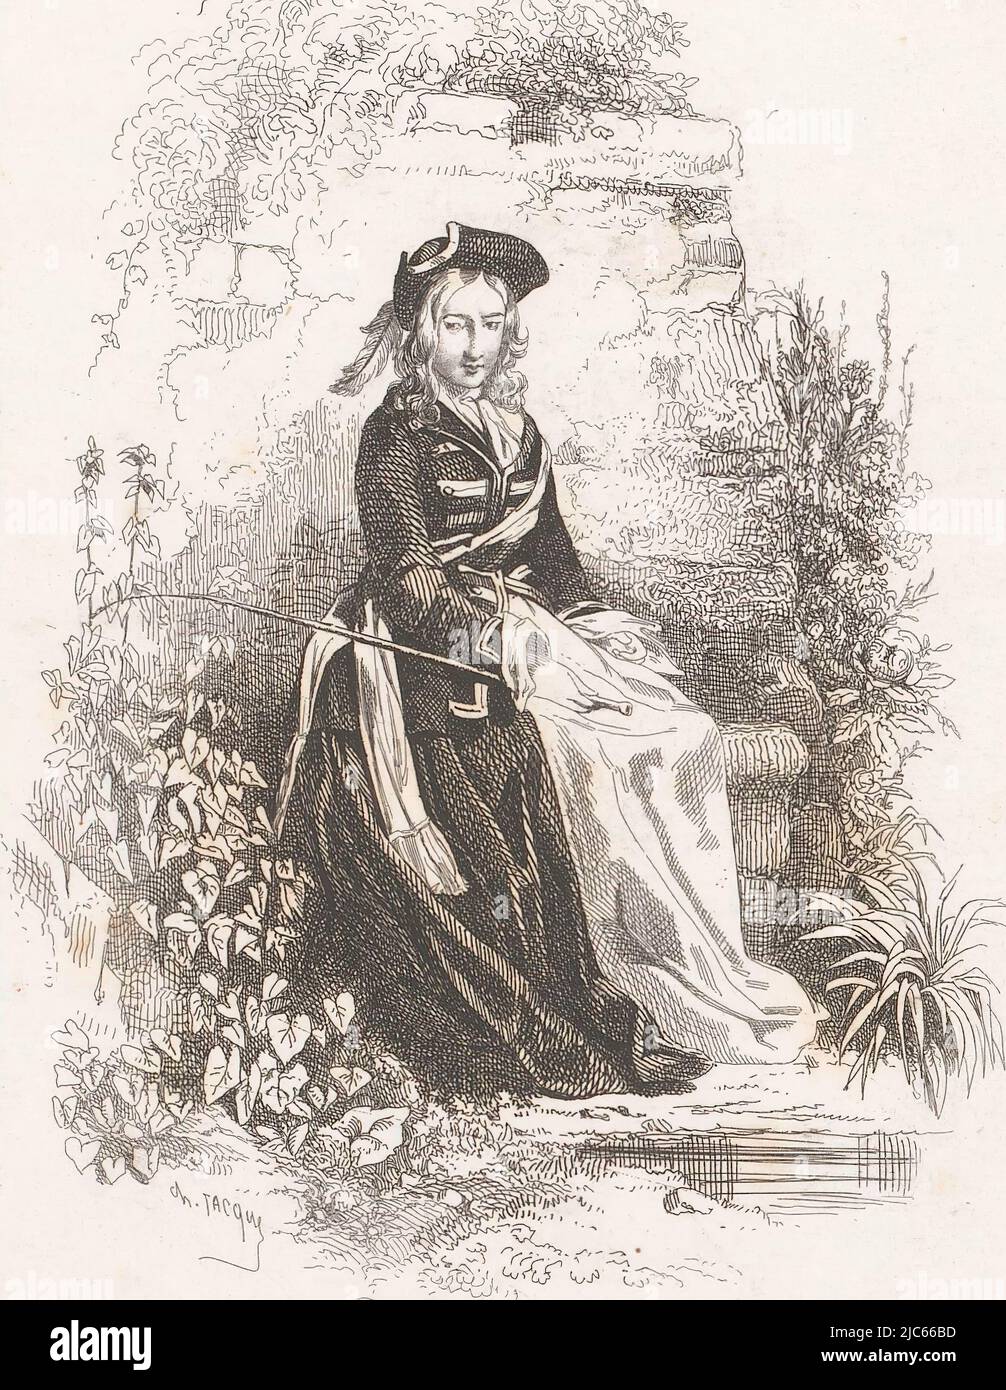 Woman in riding dress on a bench Diana Vernon , print maker: Charles Emile Jacque, (attributed to), publisher: Firmin-Didot & Cie, print maker: France, publisher: Paris, 1844, paper, etching, h 121 mm - w 82 mm Stock Photo